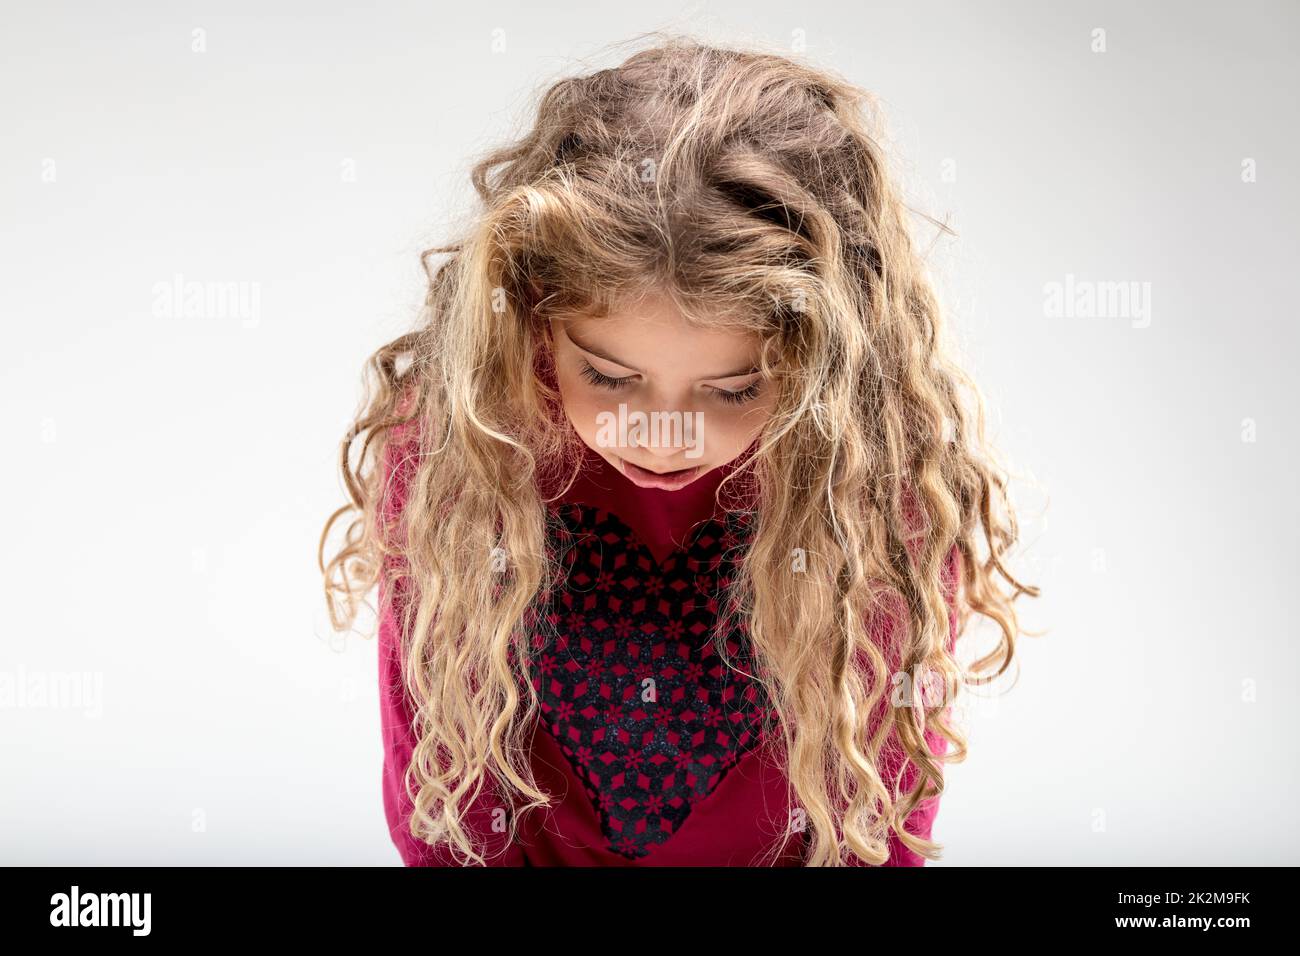 Sad curly-haired schoolgirl with head down Stock Photo